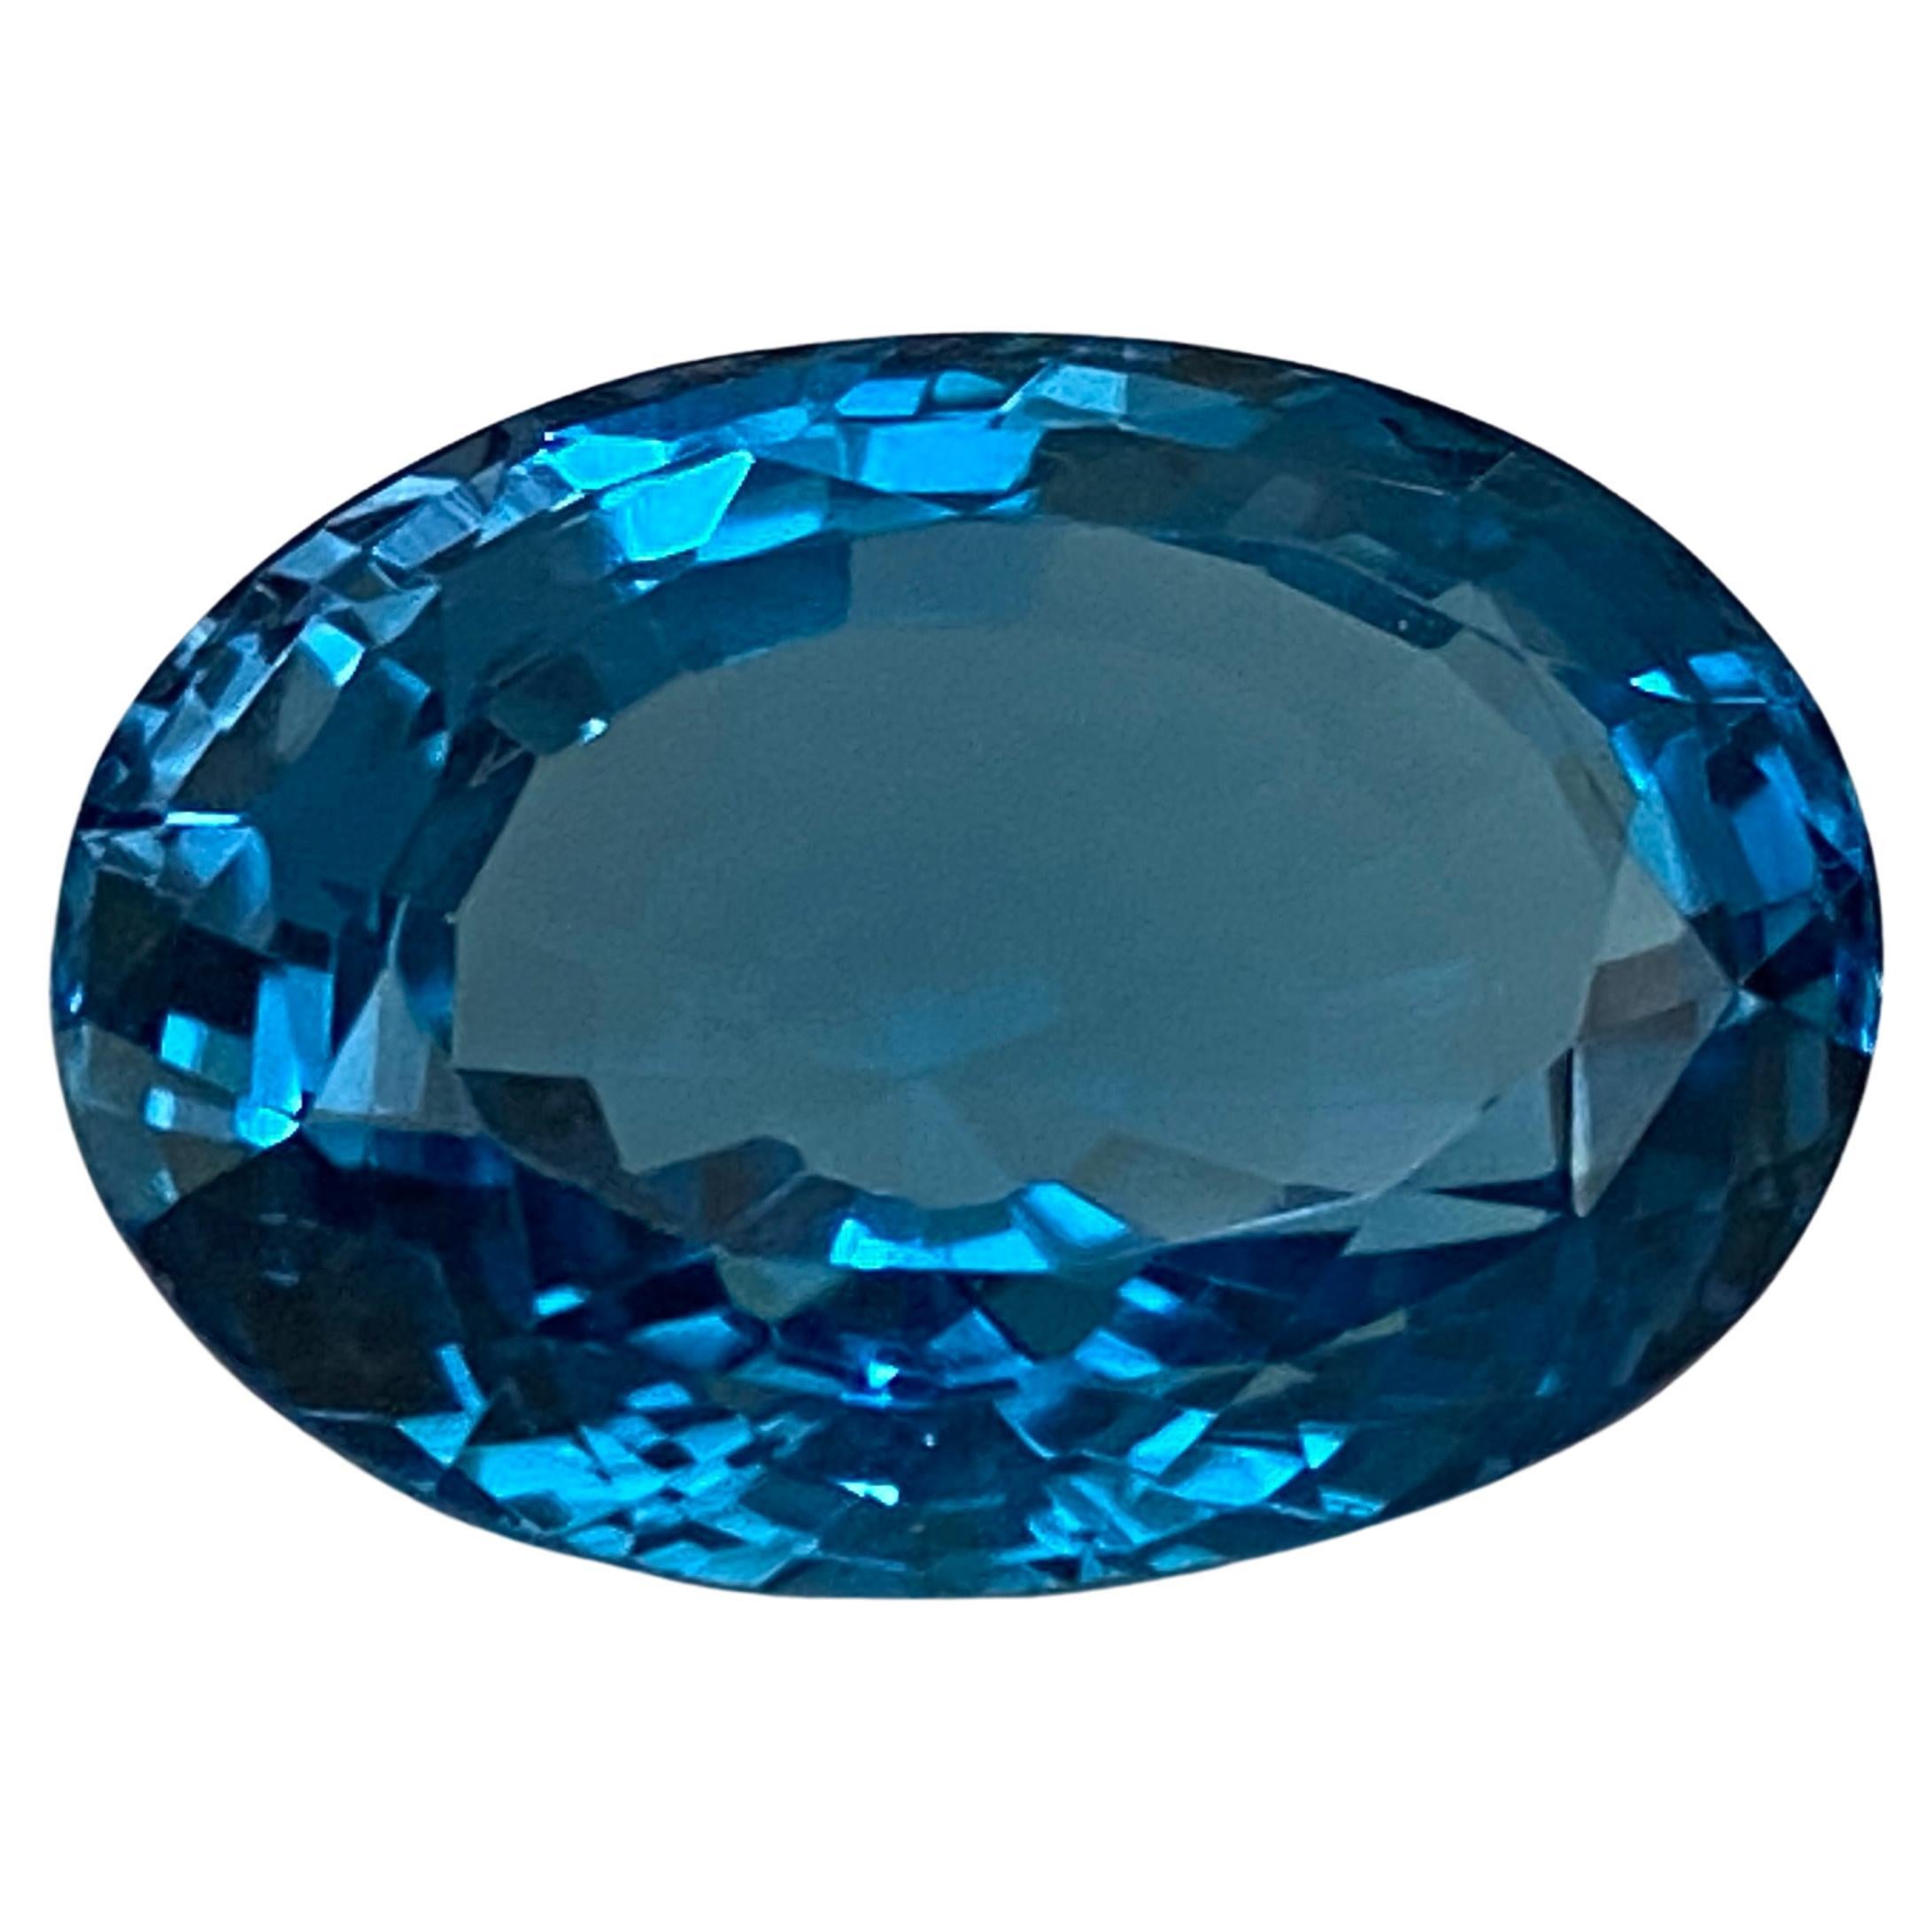 Natural London Blue Topaz Gemstone21.23 Ct Oval Mixed Cut. For Sale